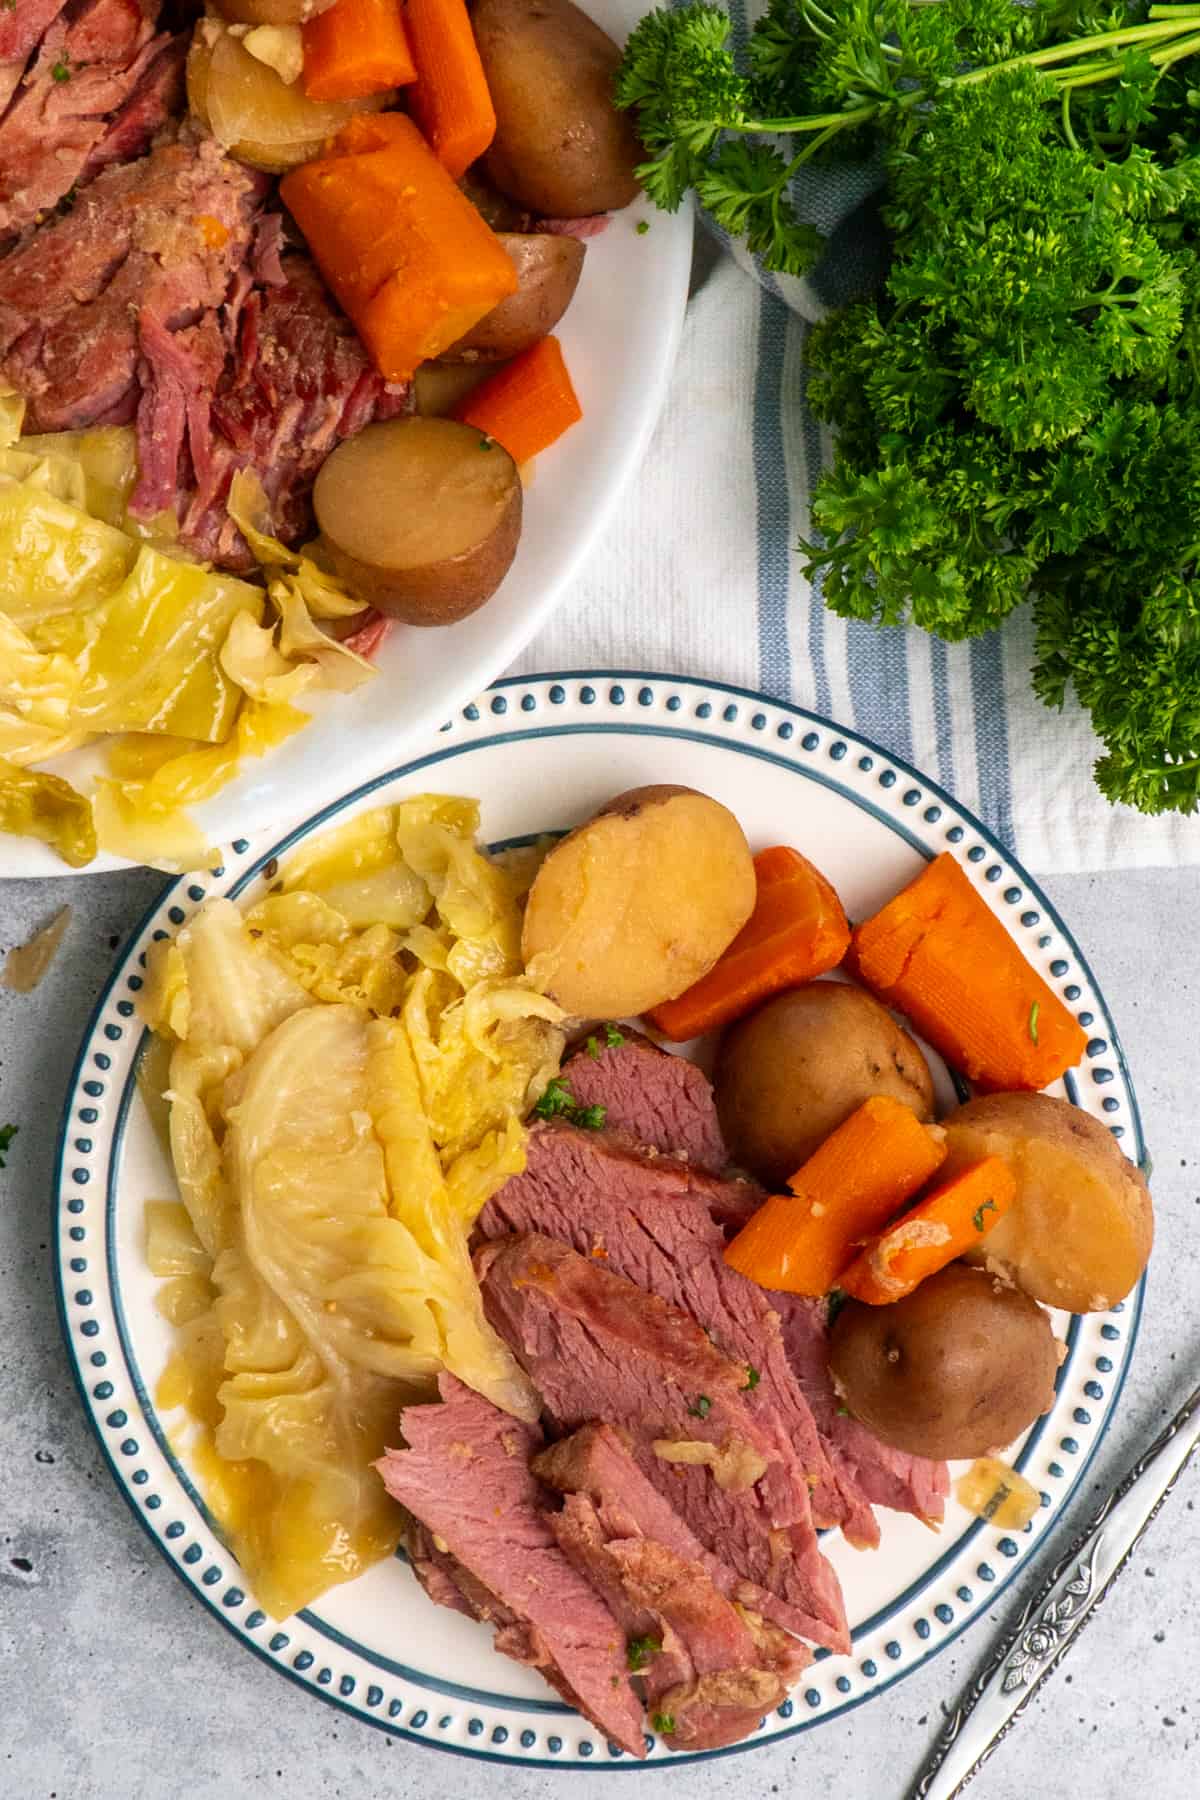 Corned beef on a platter and a plate.